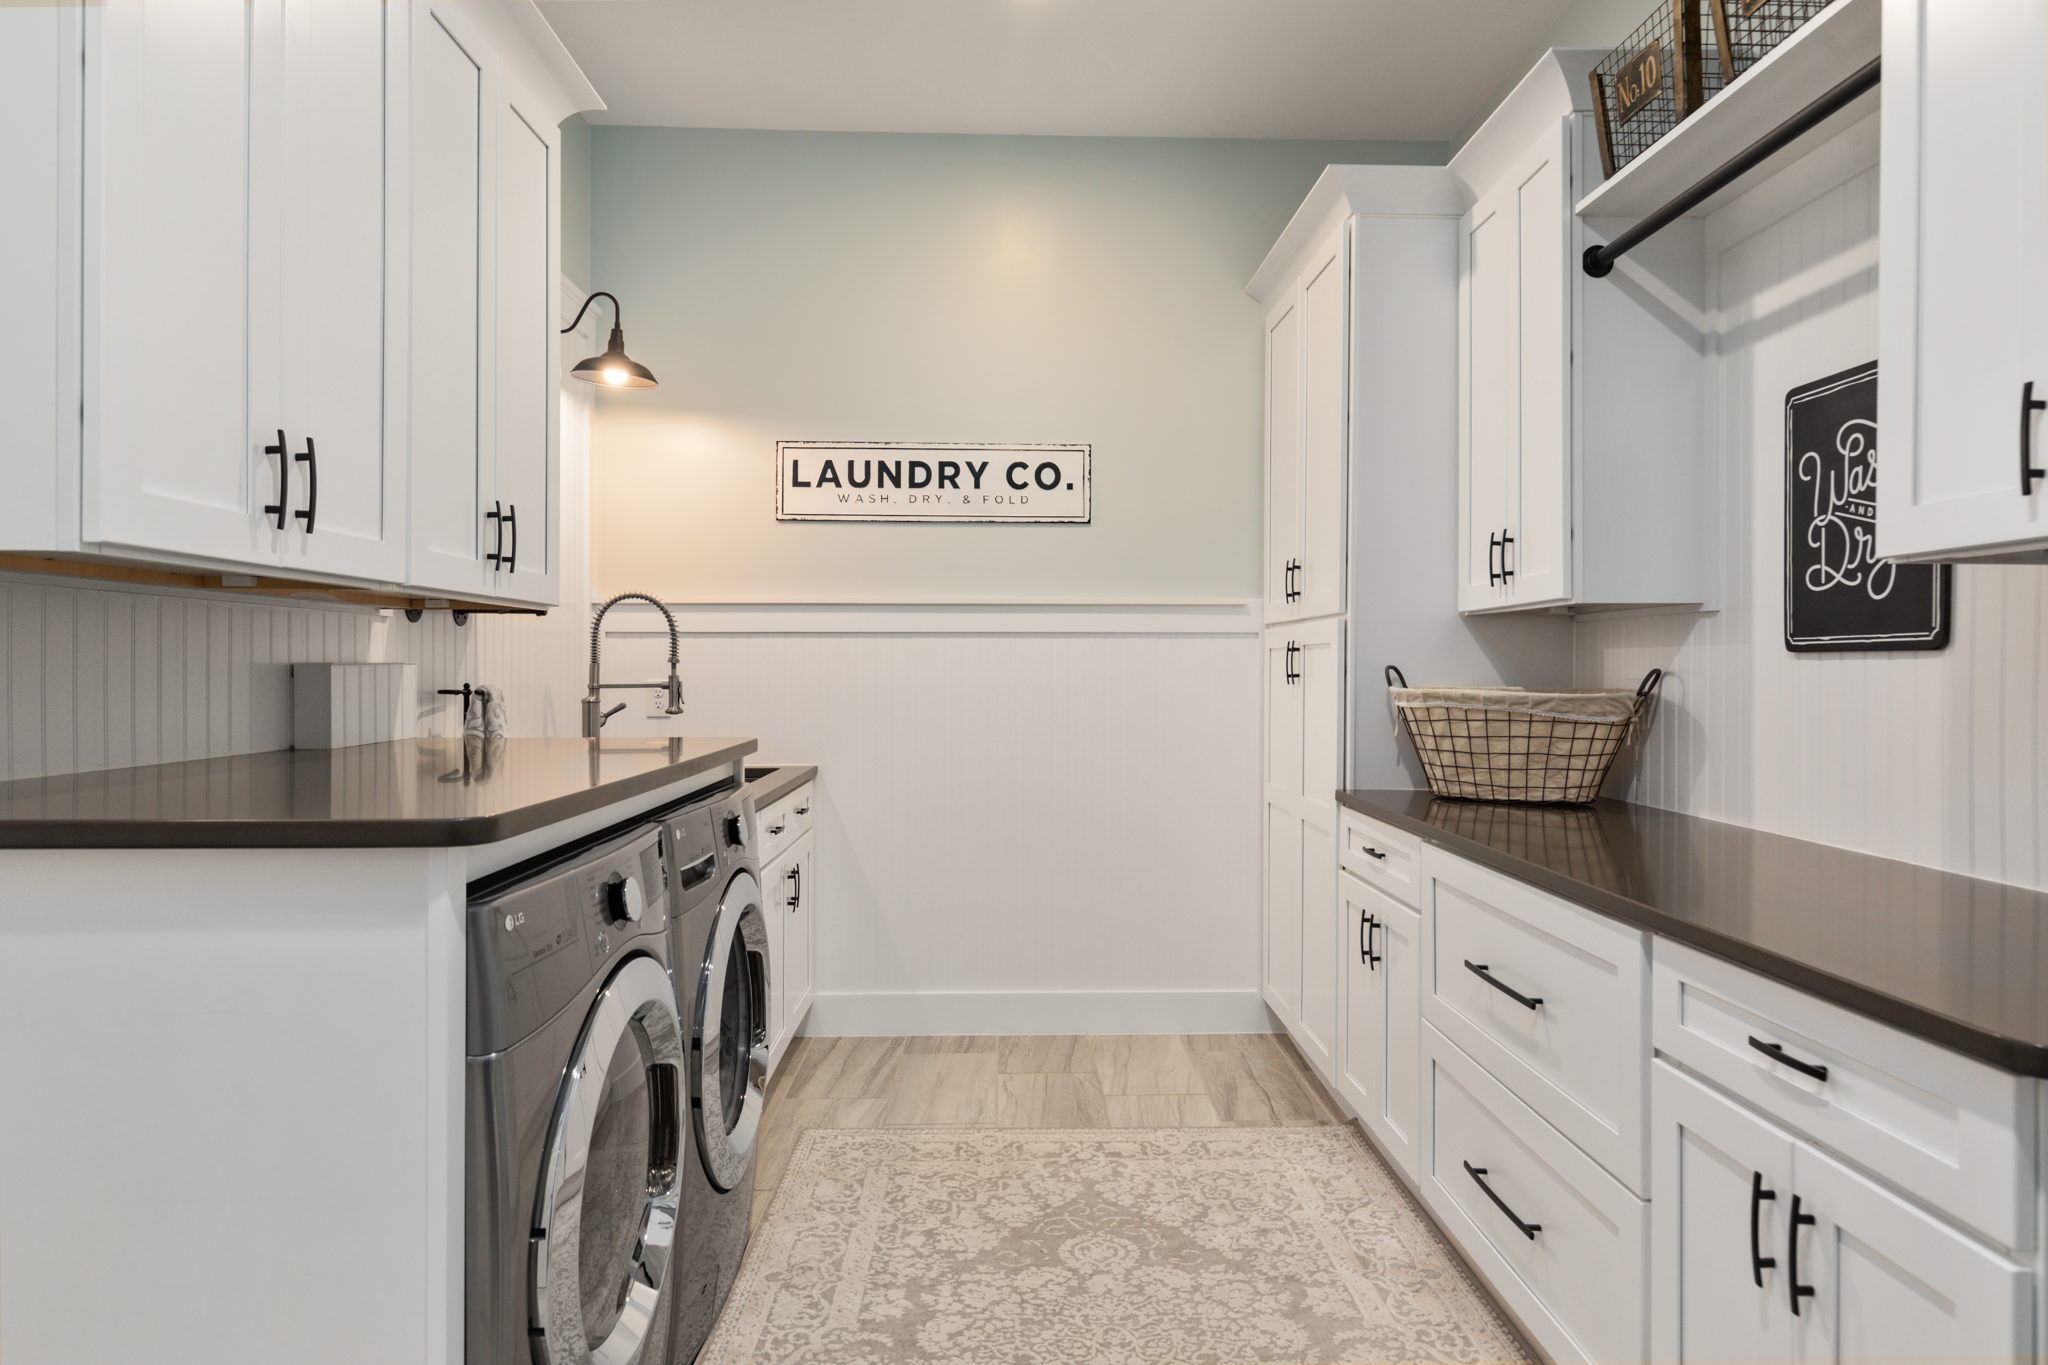 Impeccable laundry room